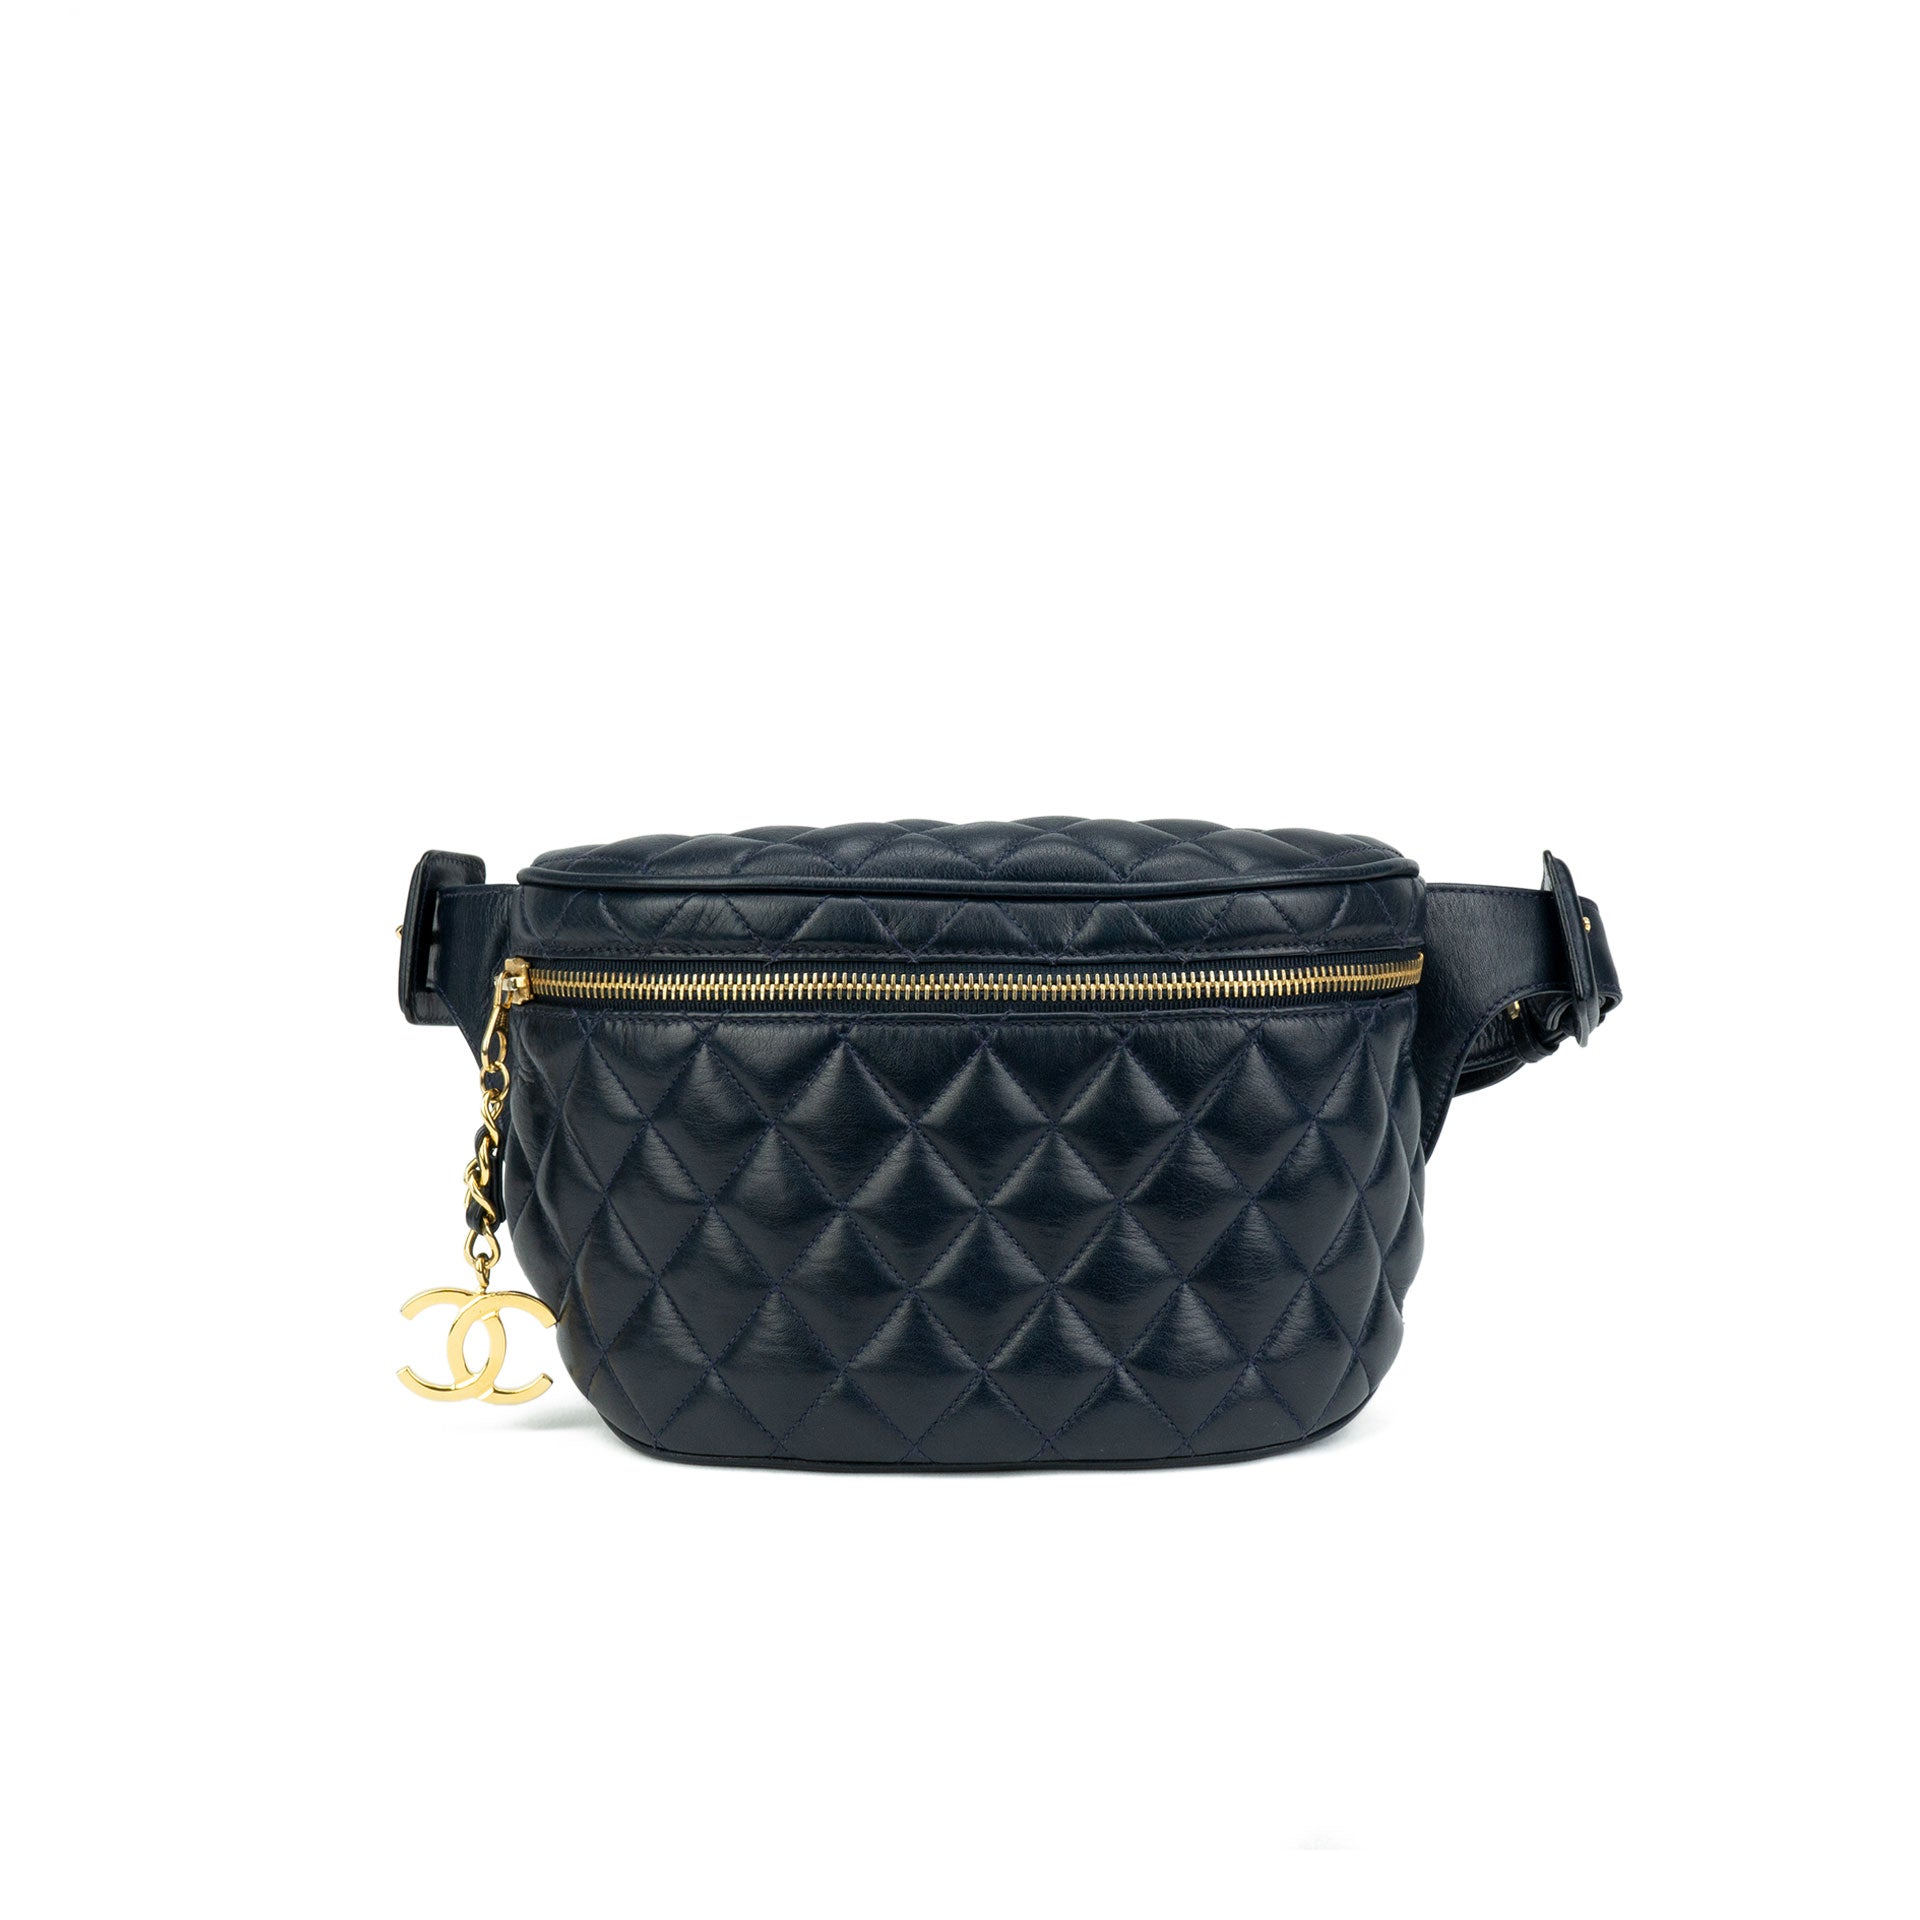 Chanel Large on The Road Tote